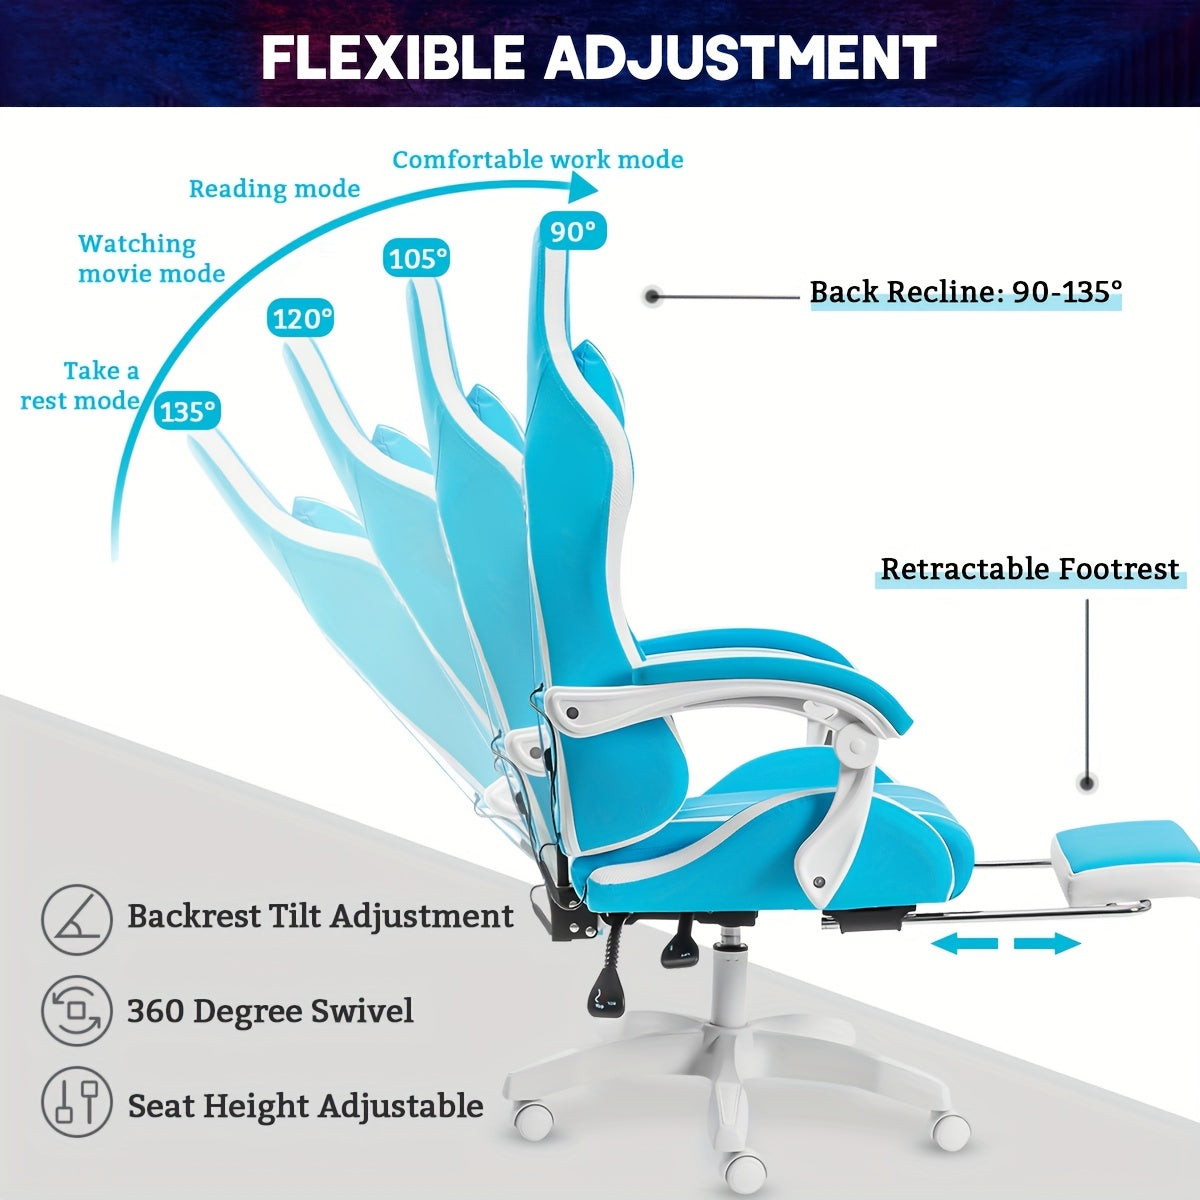 Supreme RGB LED Gaming Chair with Built-in Massage - High-Back Ergonomic Computer Chair for Gamers, featuring Reclining Footrest, Adjustable Lumbar Support, and Synchronized Linkage Armrest - Rexpect Nerd